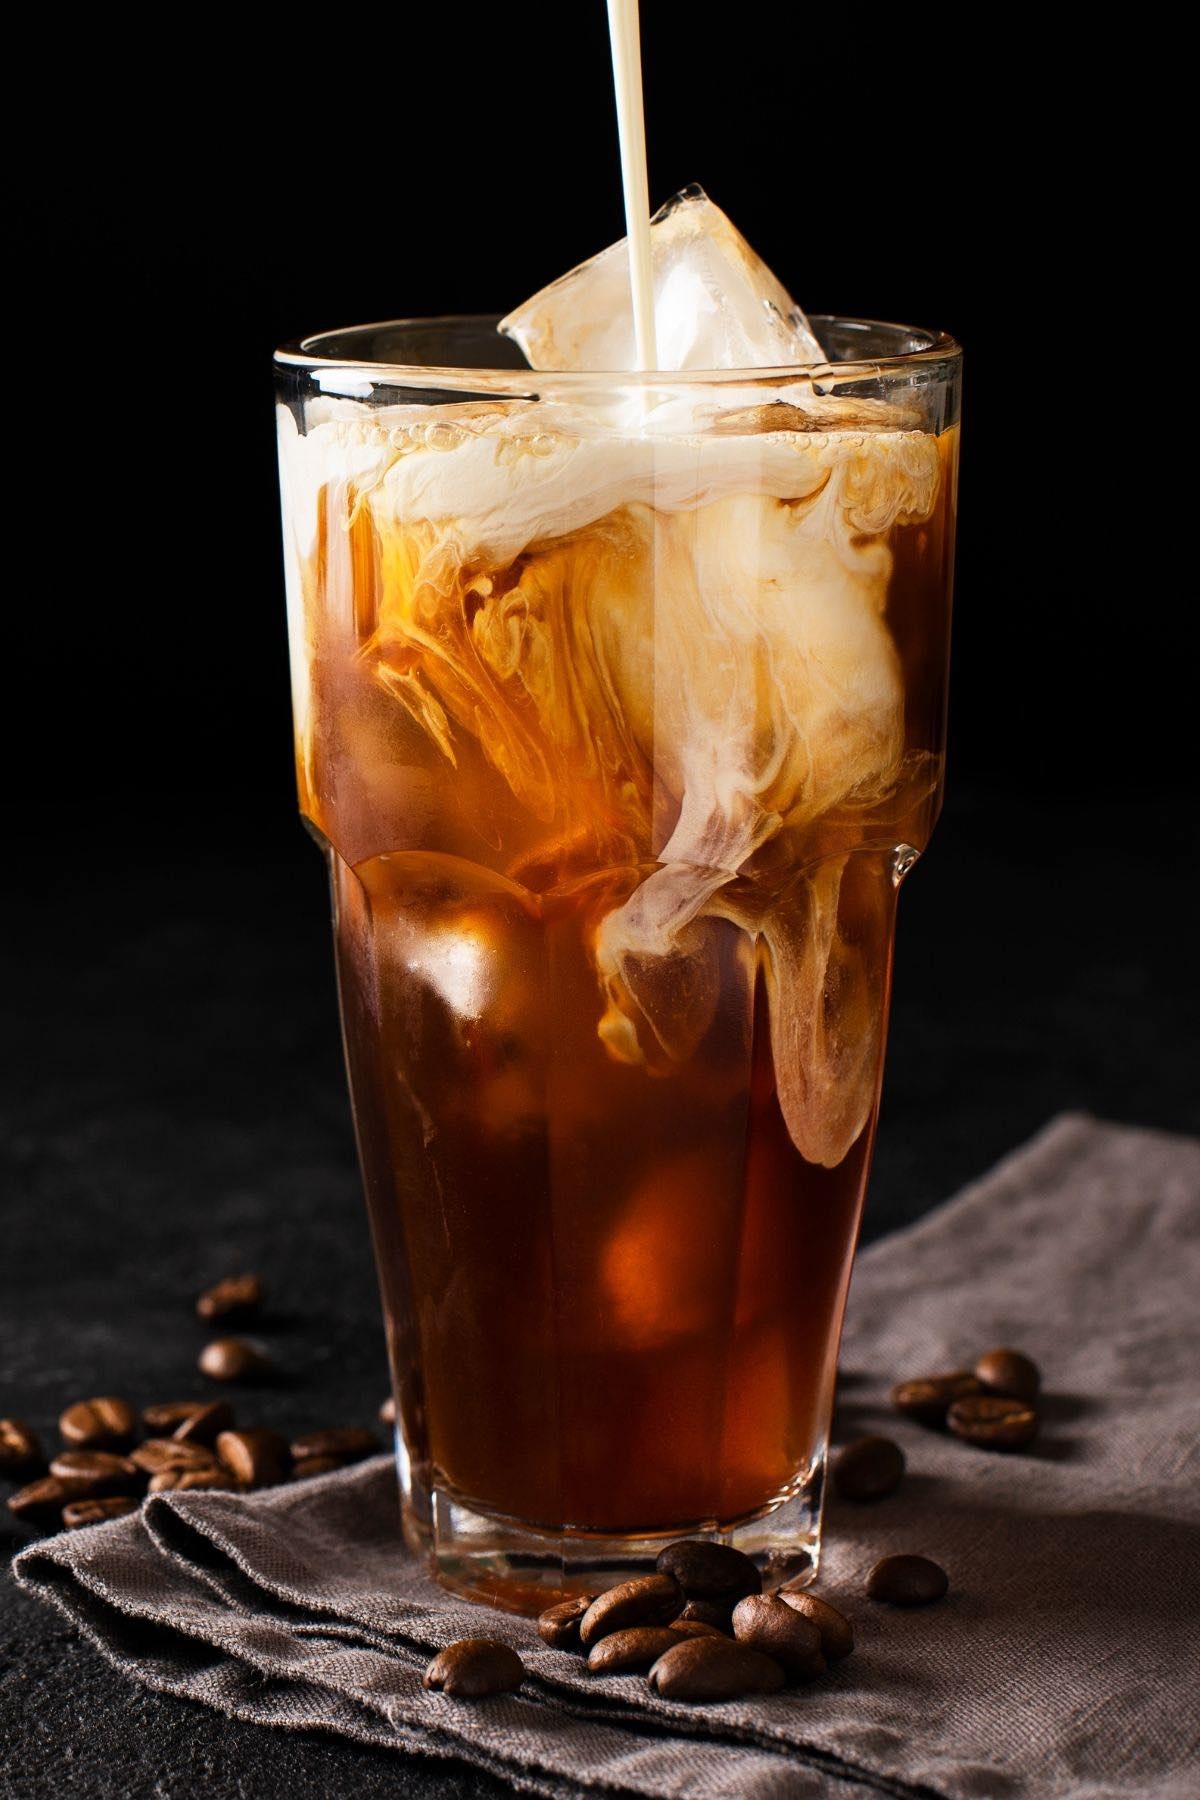 Cold brew with sweet vanilla foam